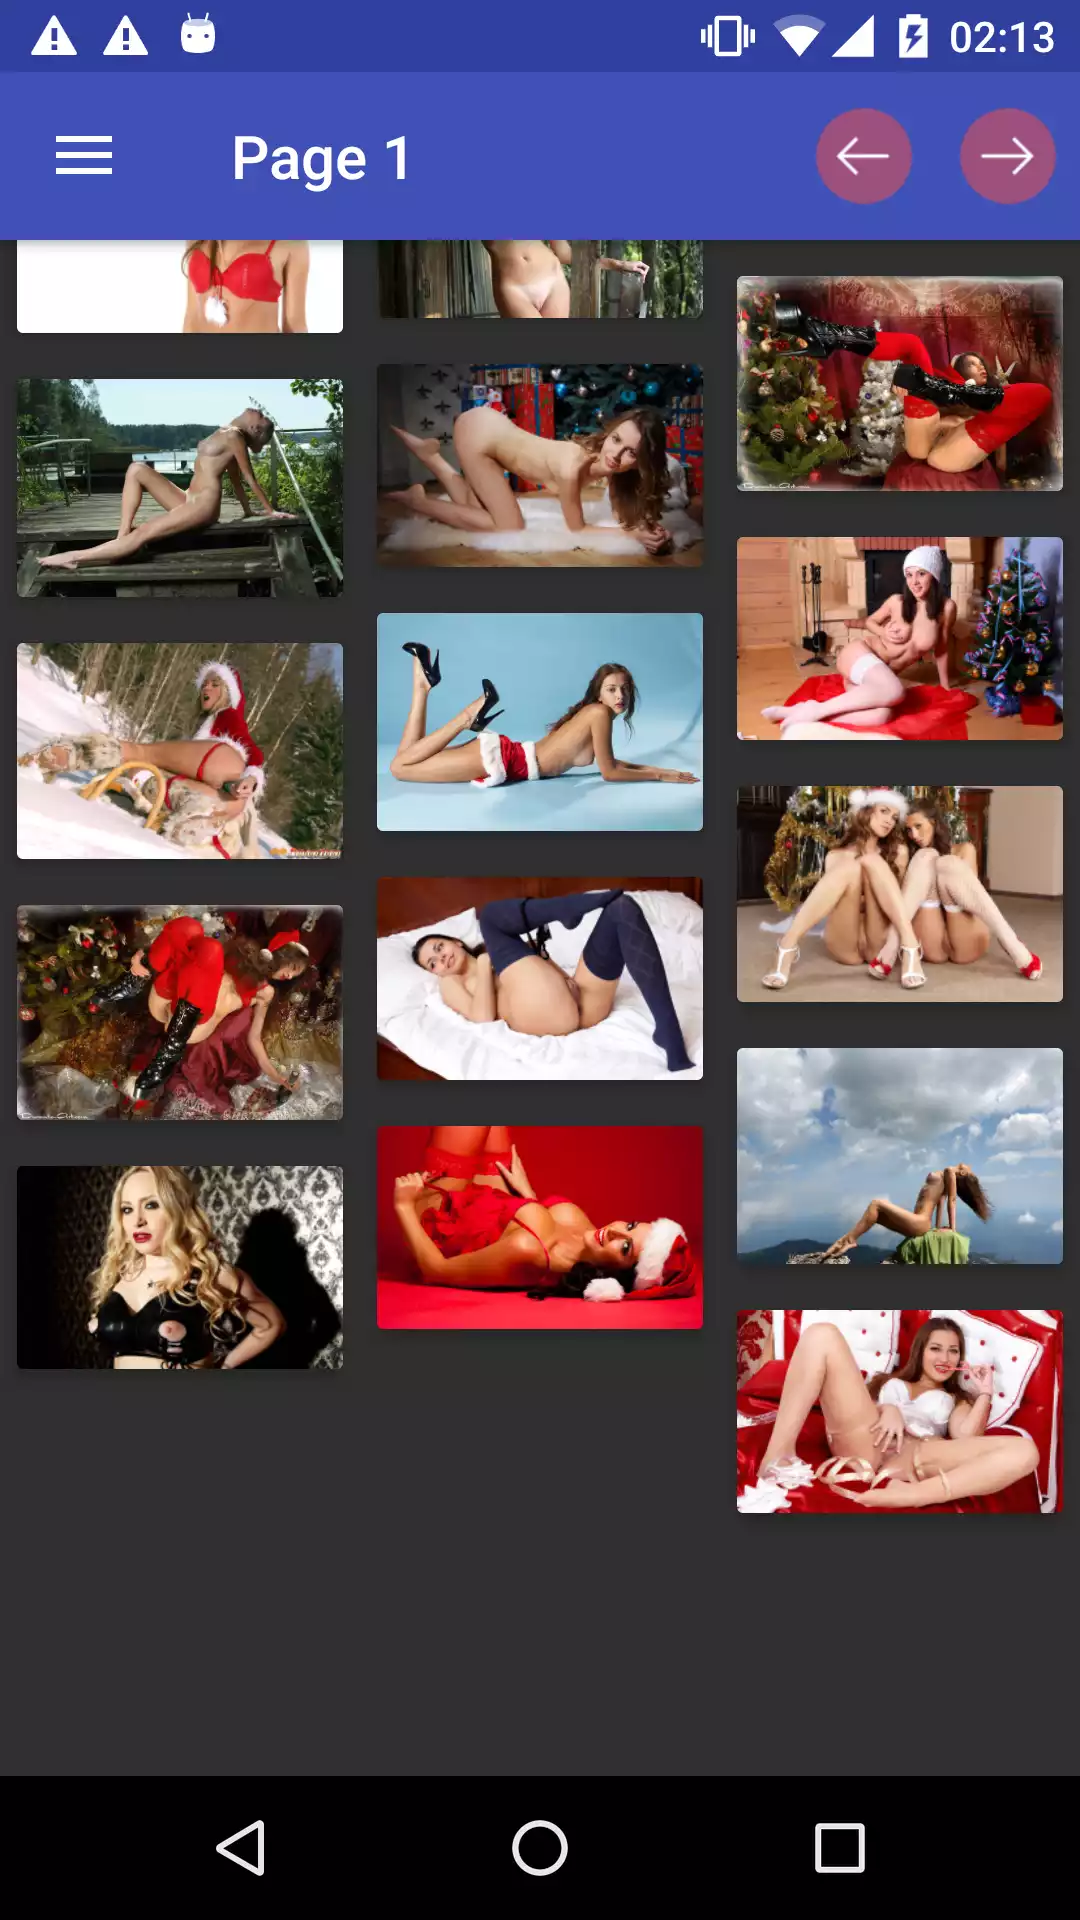 xxx-holidays for,download,excuses,pornstar,photo,hntai,panties,images,wallpapers,android,pics,mobile,watching,backgrounds,app,sexy,apk,wallpaper,hentai,hentsi,porn,pictures